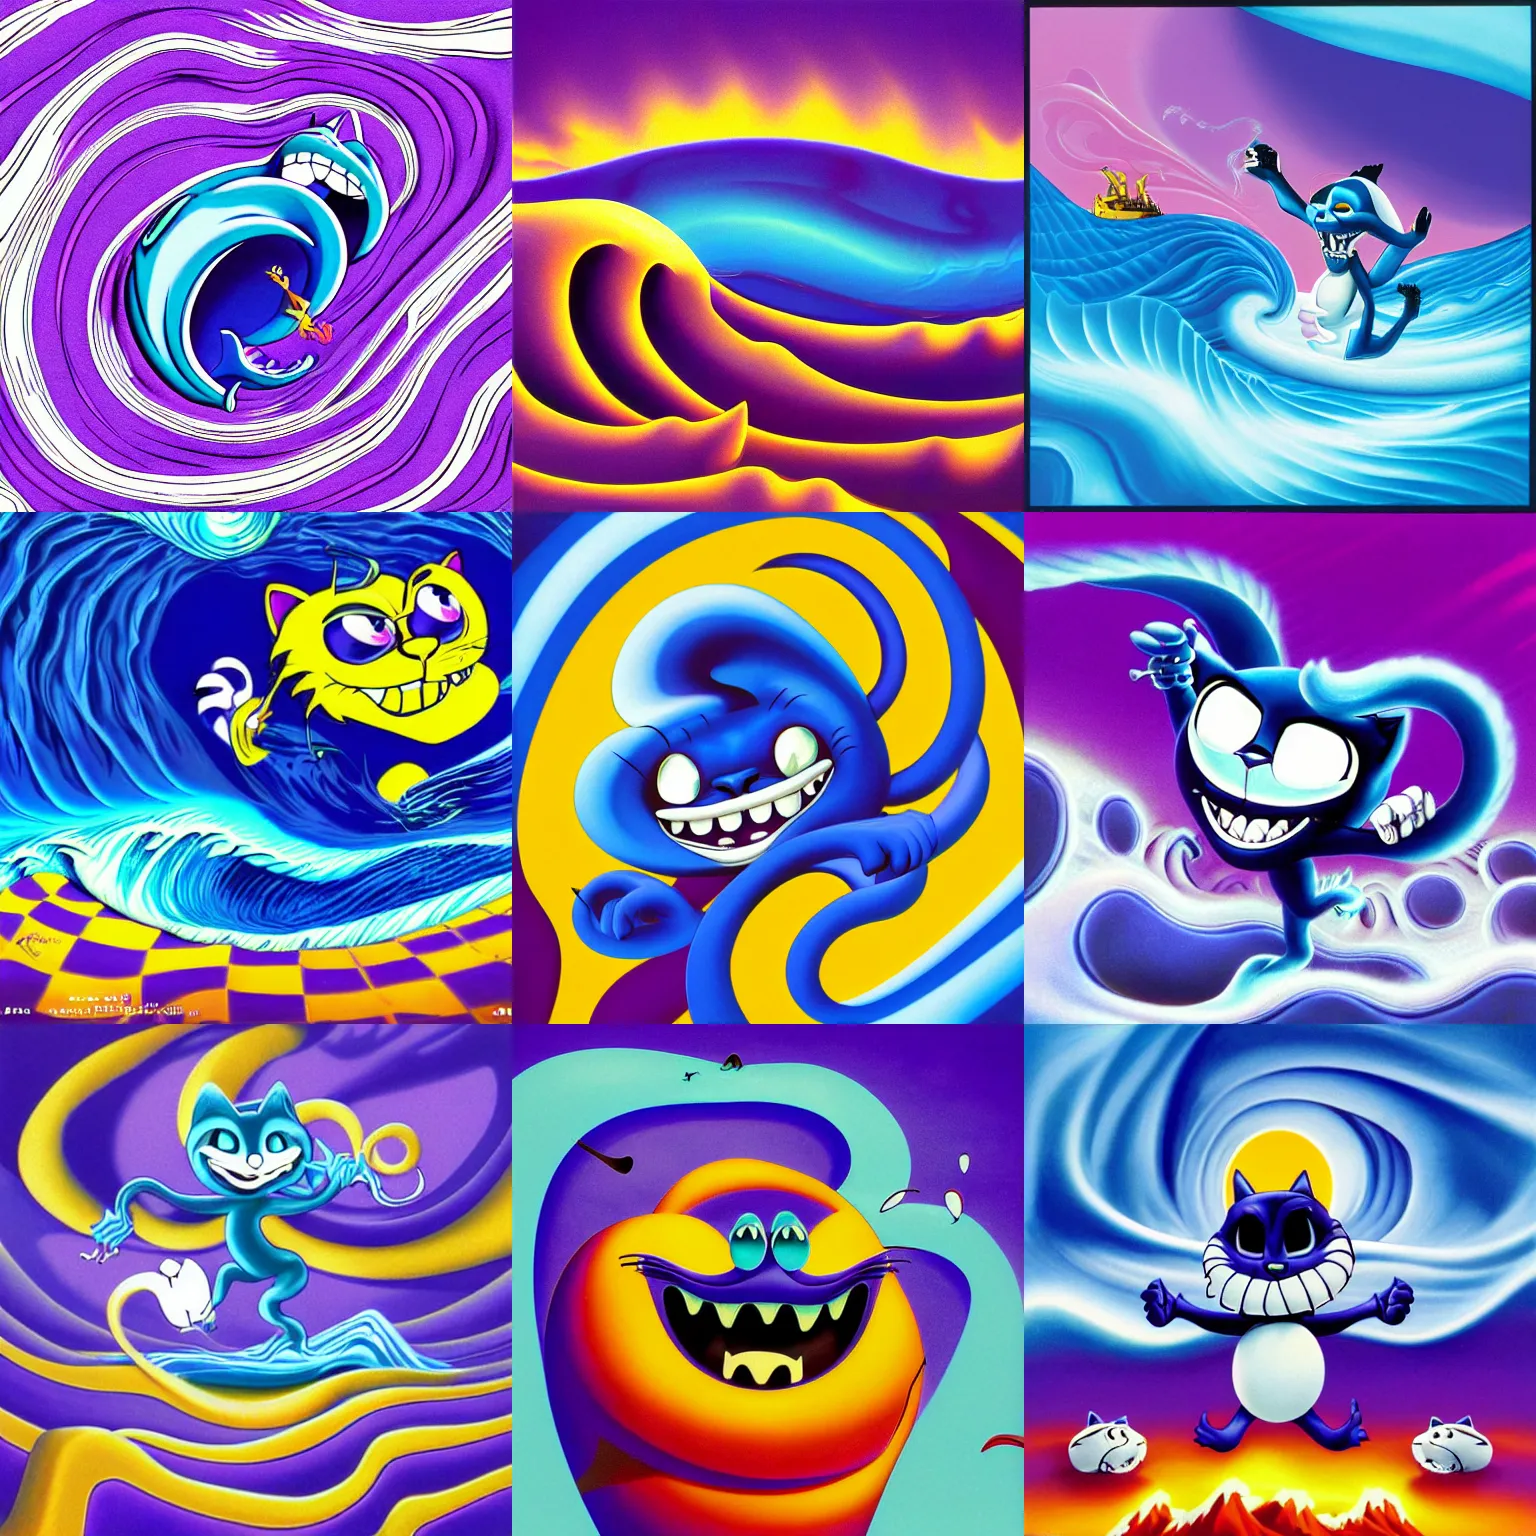 Prompt: surreal, sharp, detailed professional, high quality airbrush art album cover of a blue cresting ocean wave in the shape of felix the cat, purple checkerboard background, 1990s 1992 style of John Kricfalusi